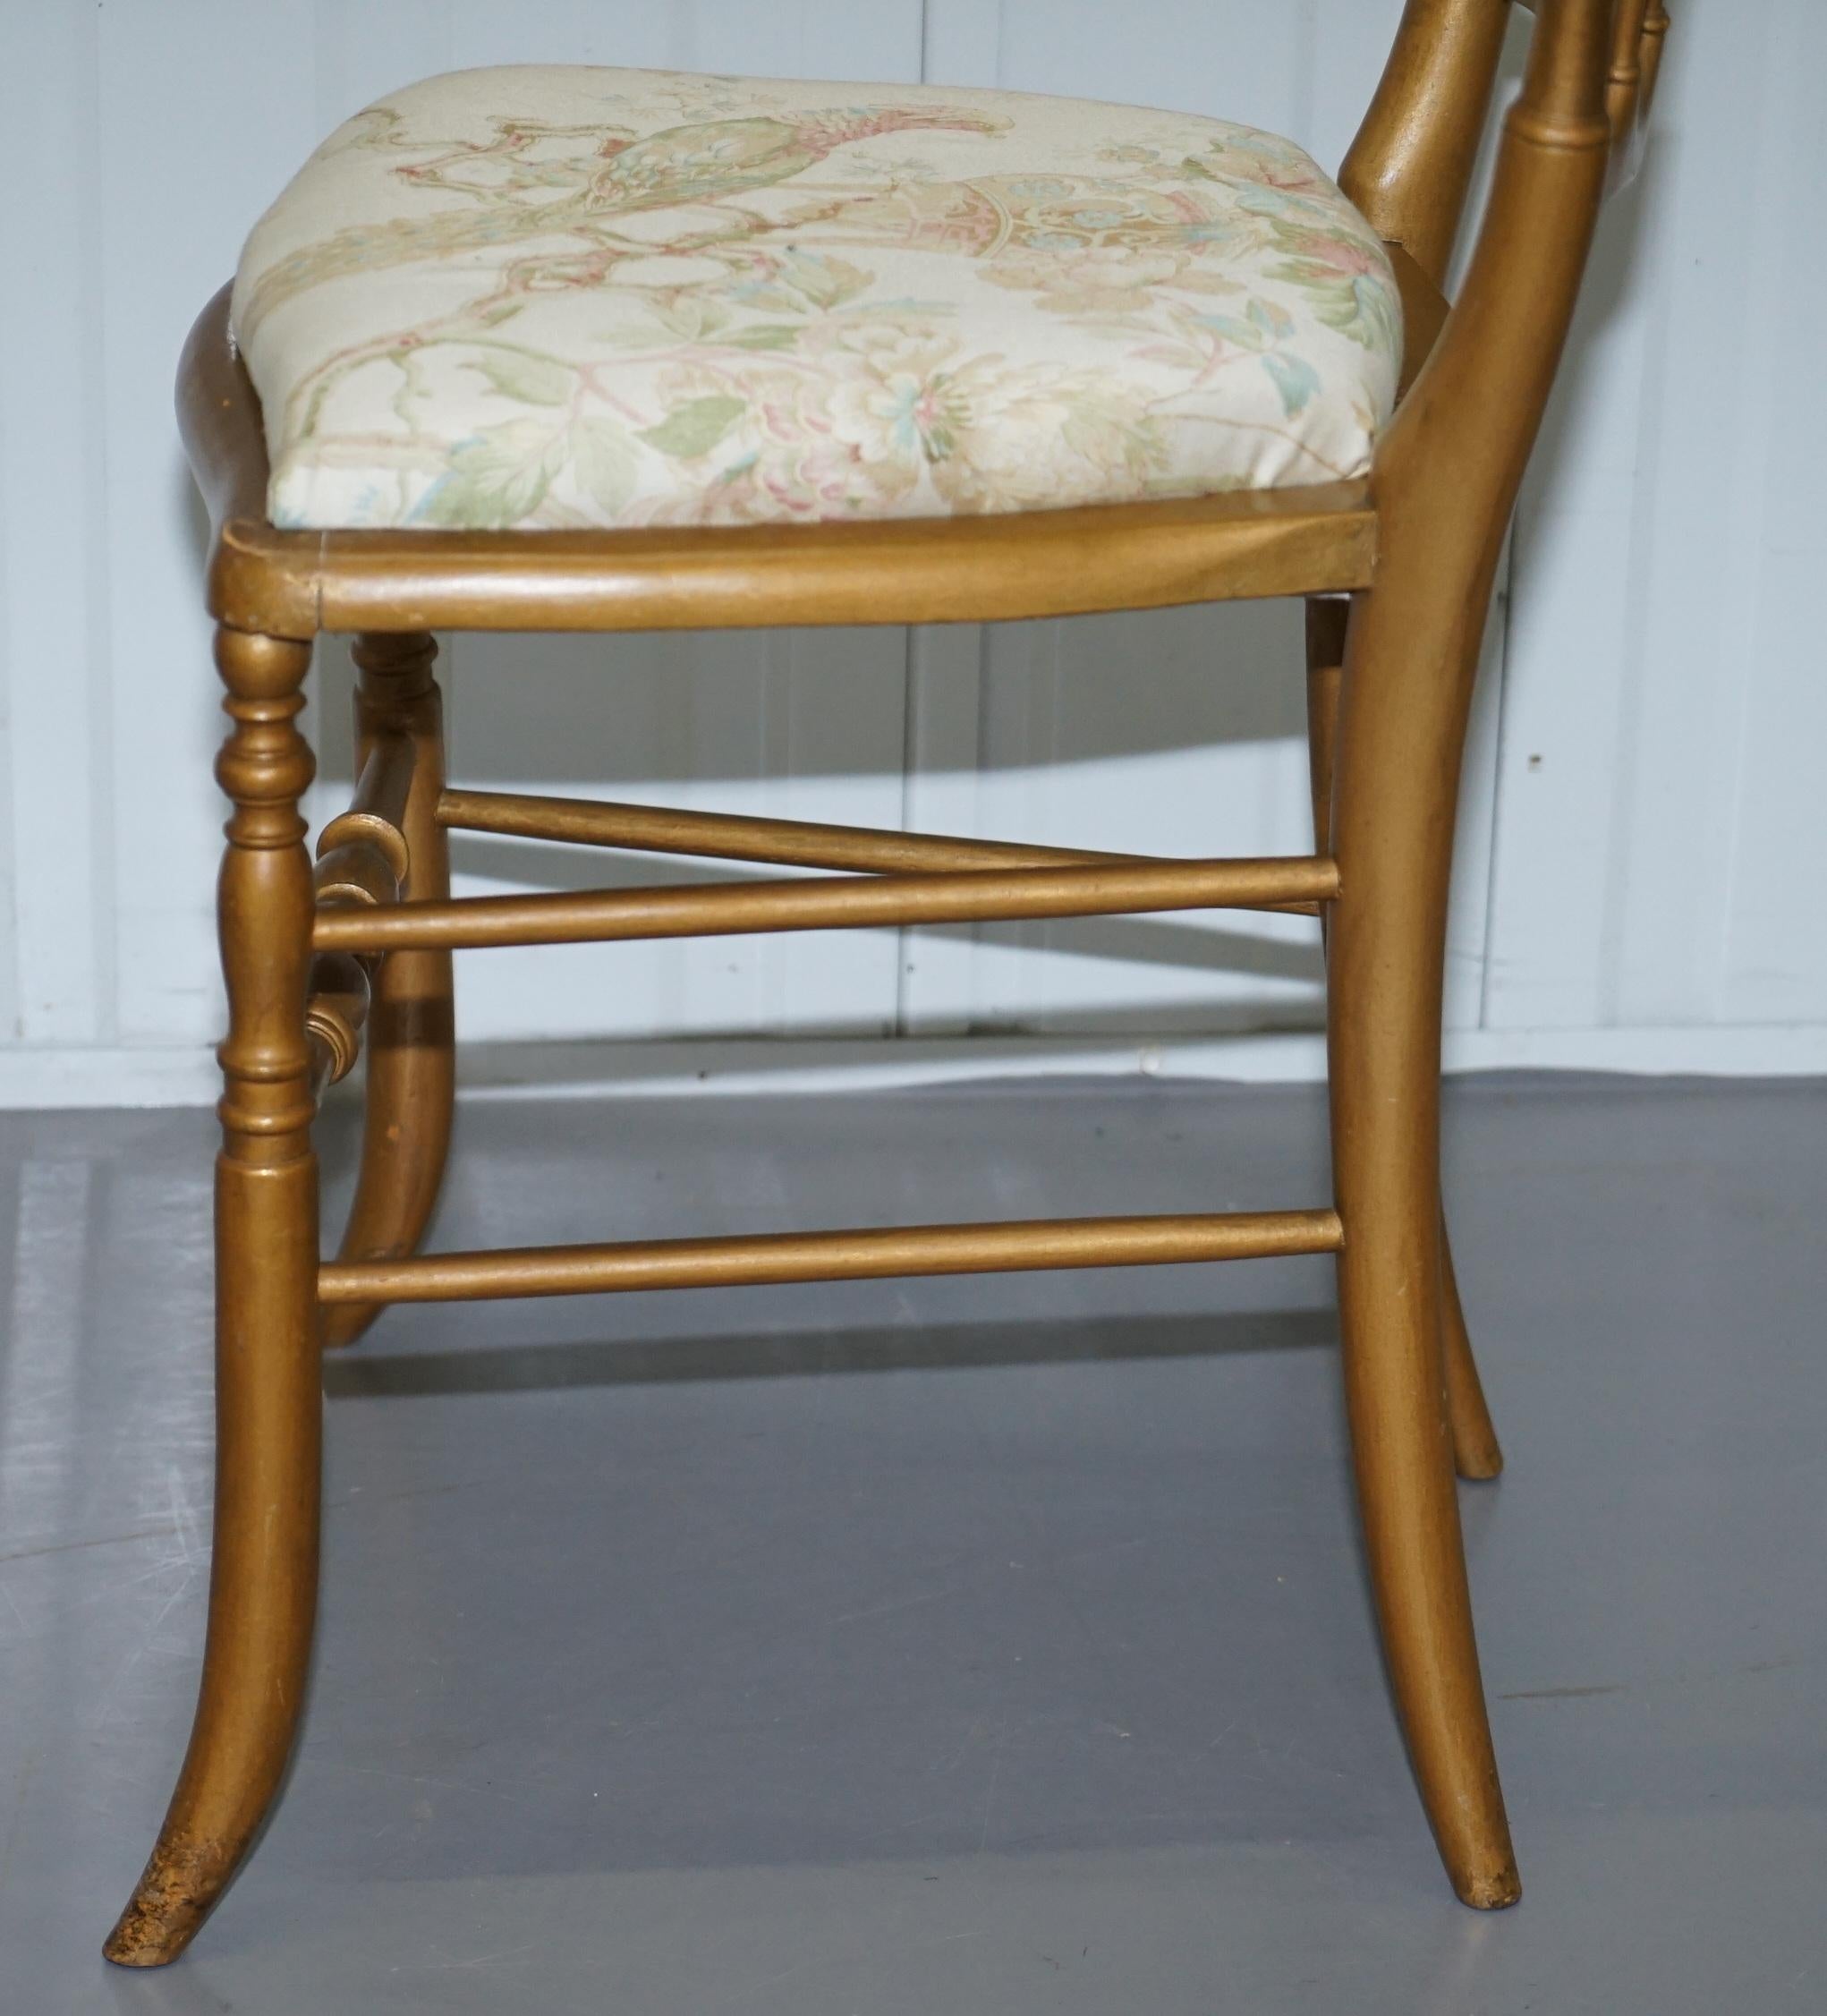 Regency Style Gold Giltwood Spindle Chair circa 1900 Ornate Bird Upholstery For Sale 10